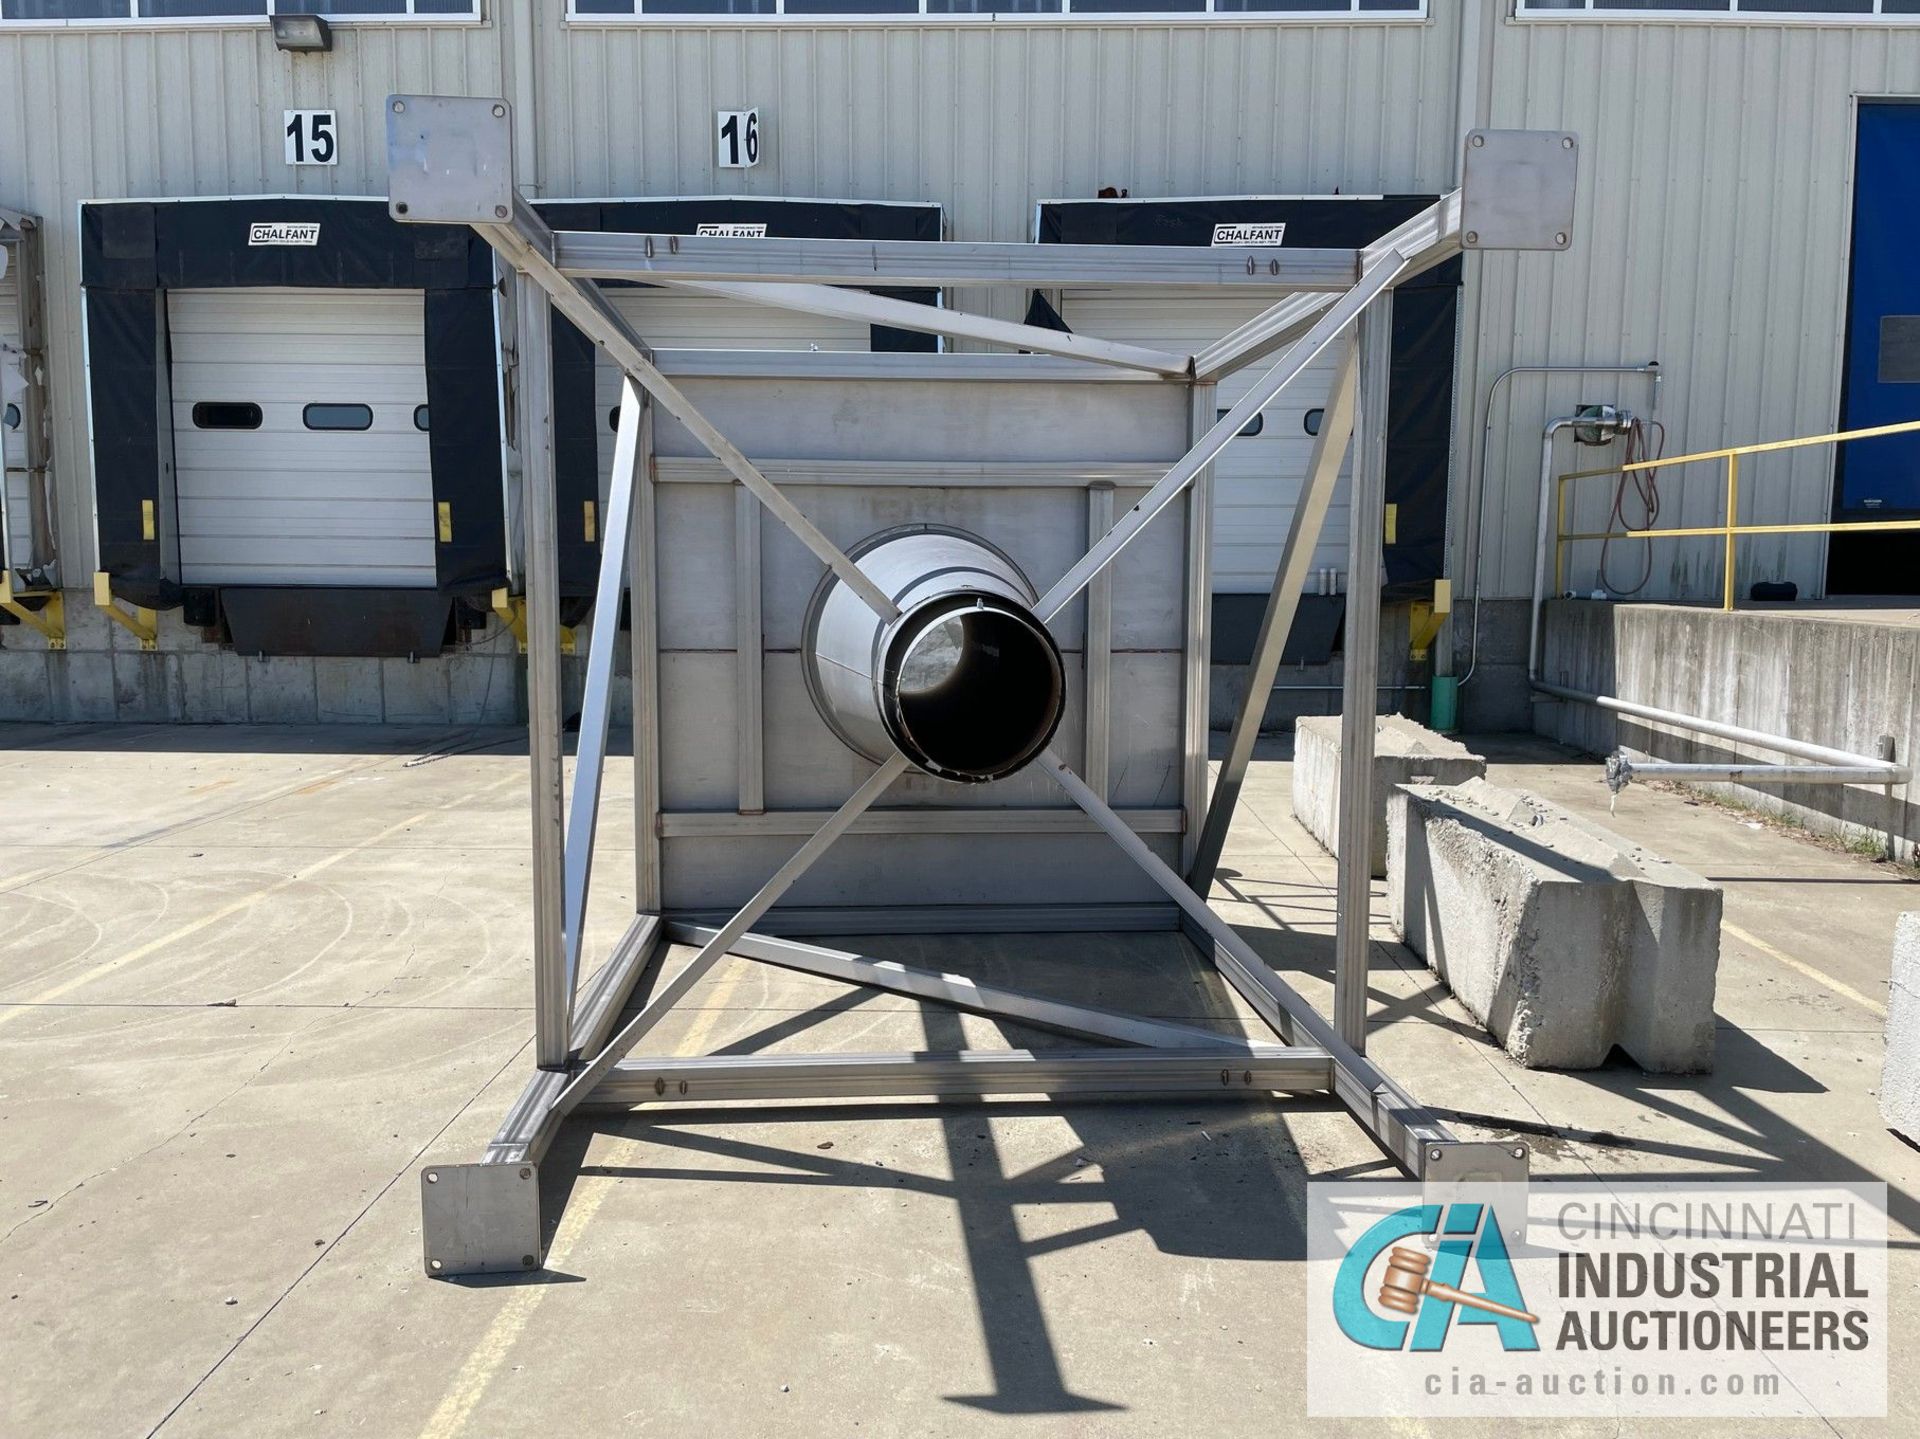 10-HP DUST COLLECTOR; QUICKDRAFT BLOWER UNIT AND CYCLONE OUTSIDE, APPROX. 15' OVERALL HEIGHT, 8' X - Image 3 of 12